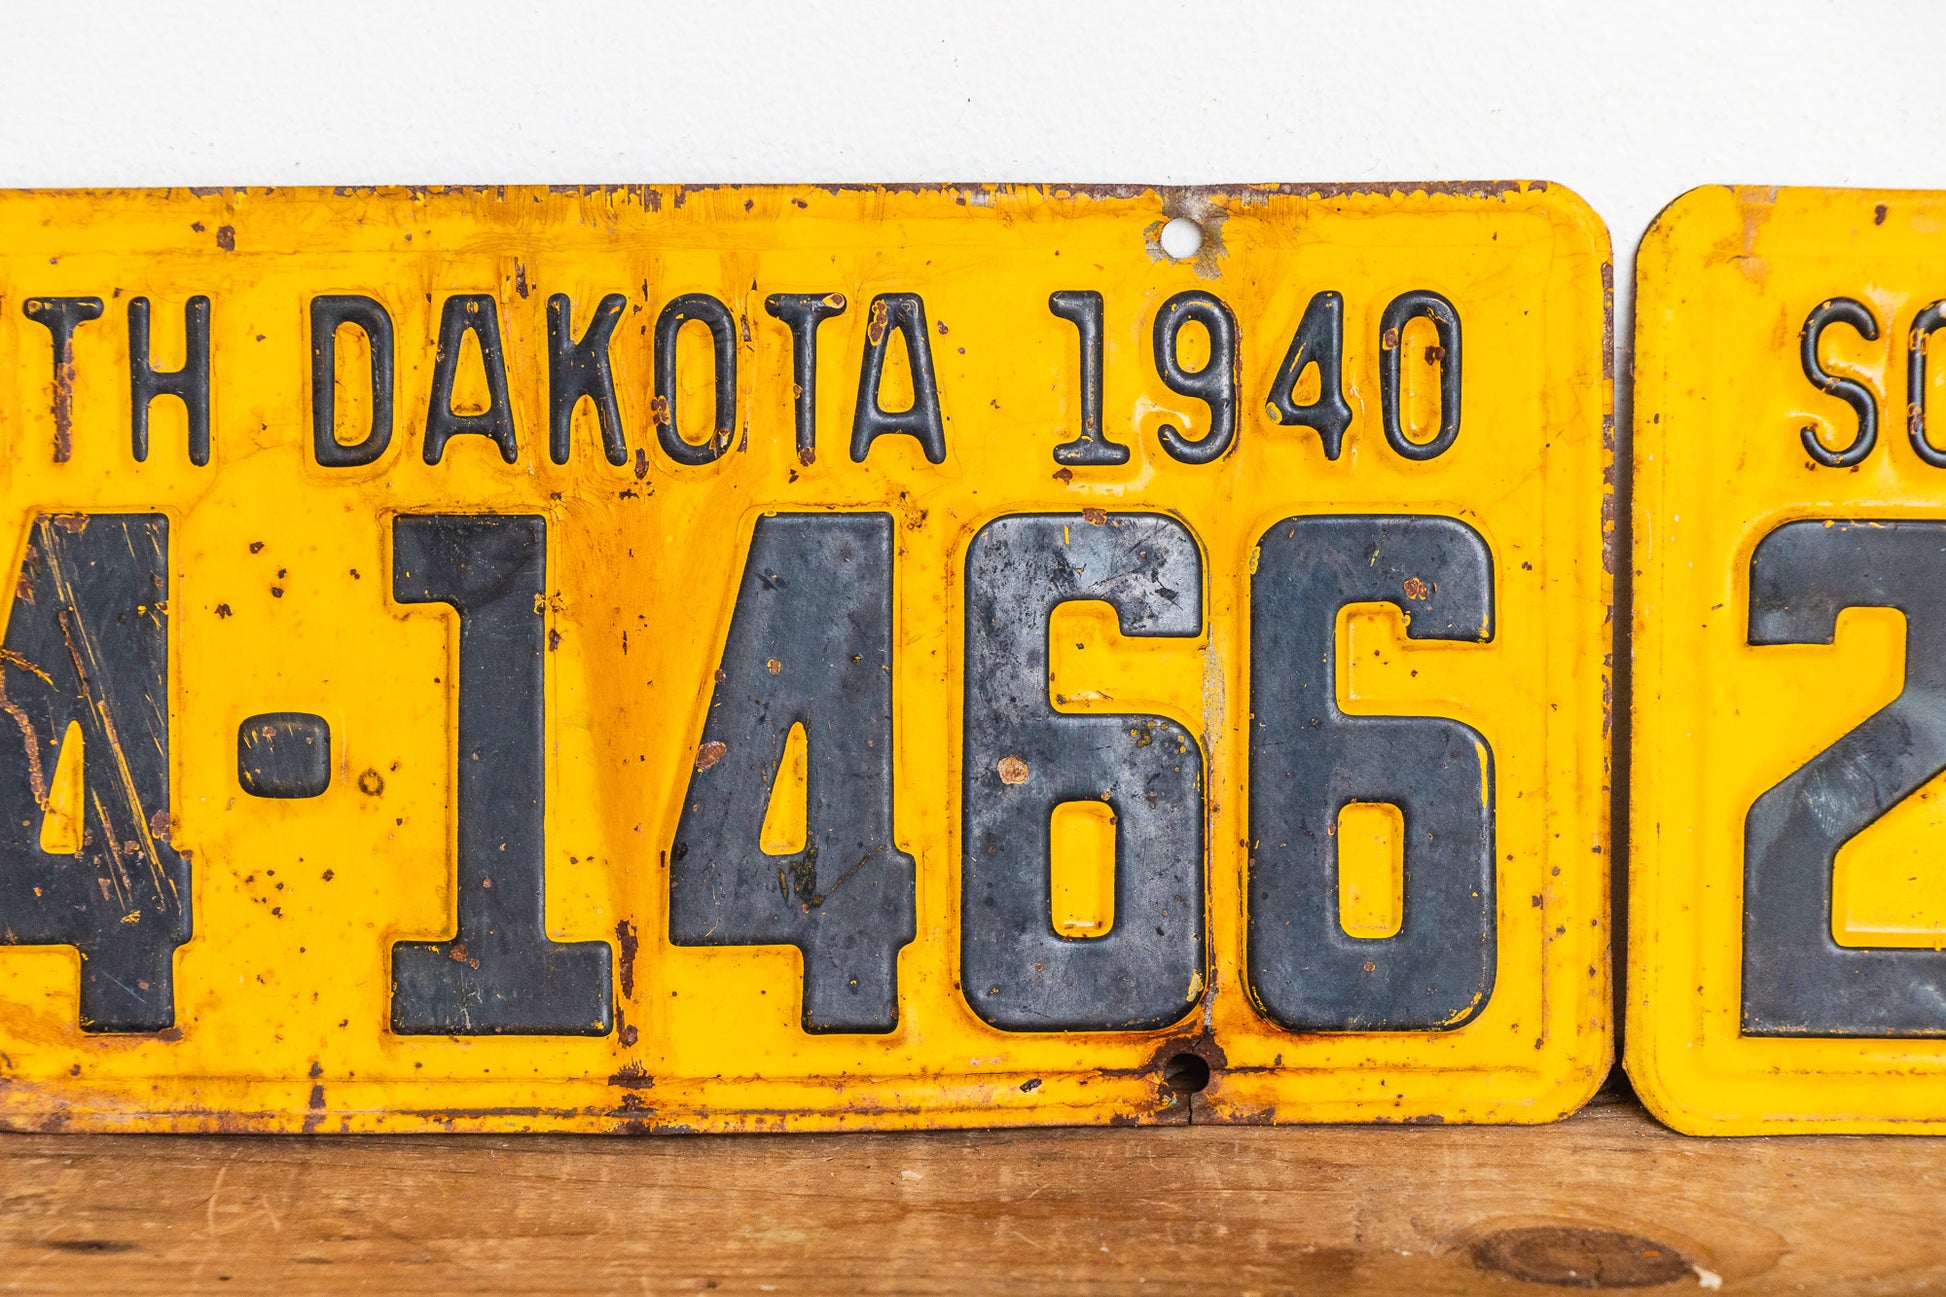 South Dakota 1940 License Plate Pair Vintage Rusty Yellow Wall Hanging Decor - Eagle's Eye Finds